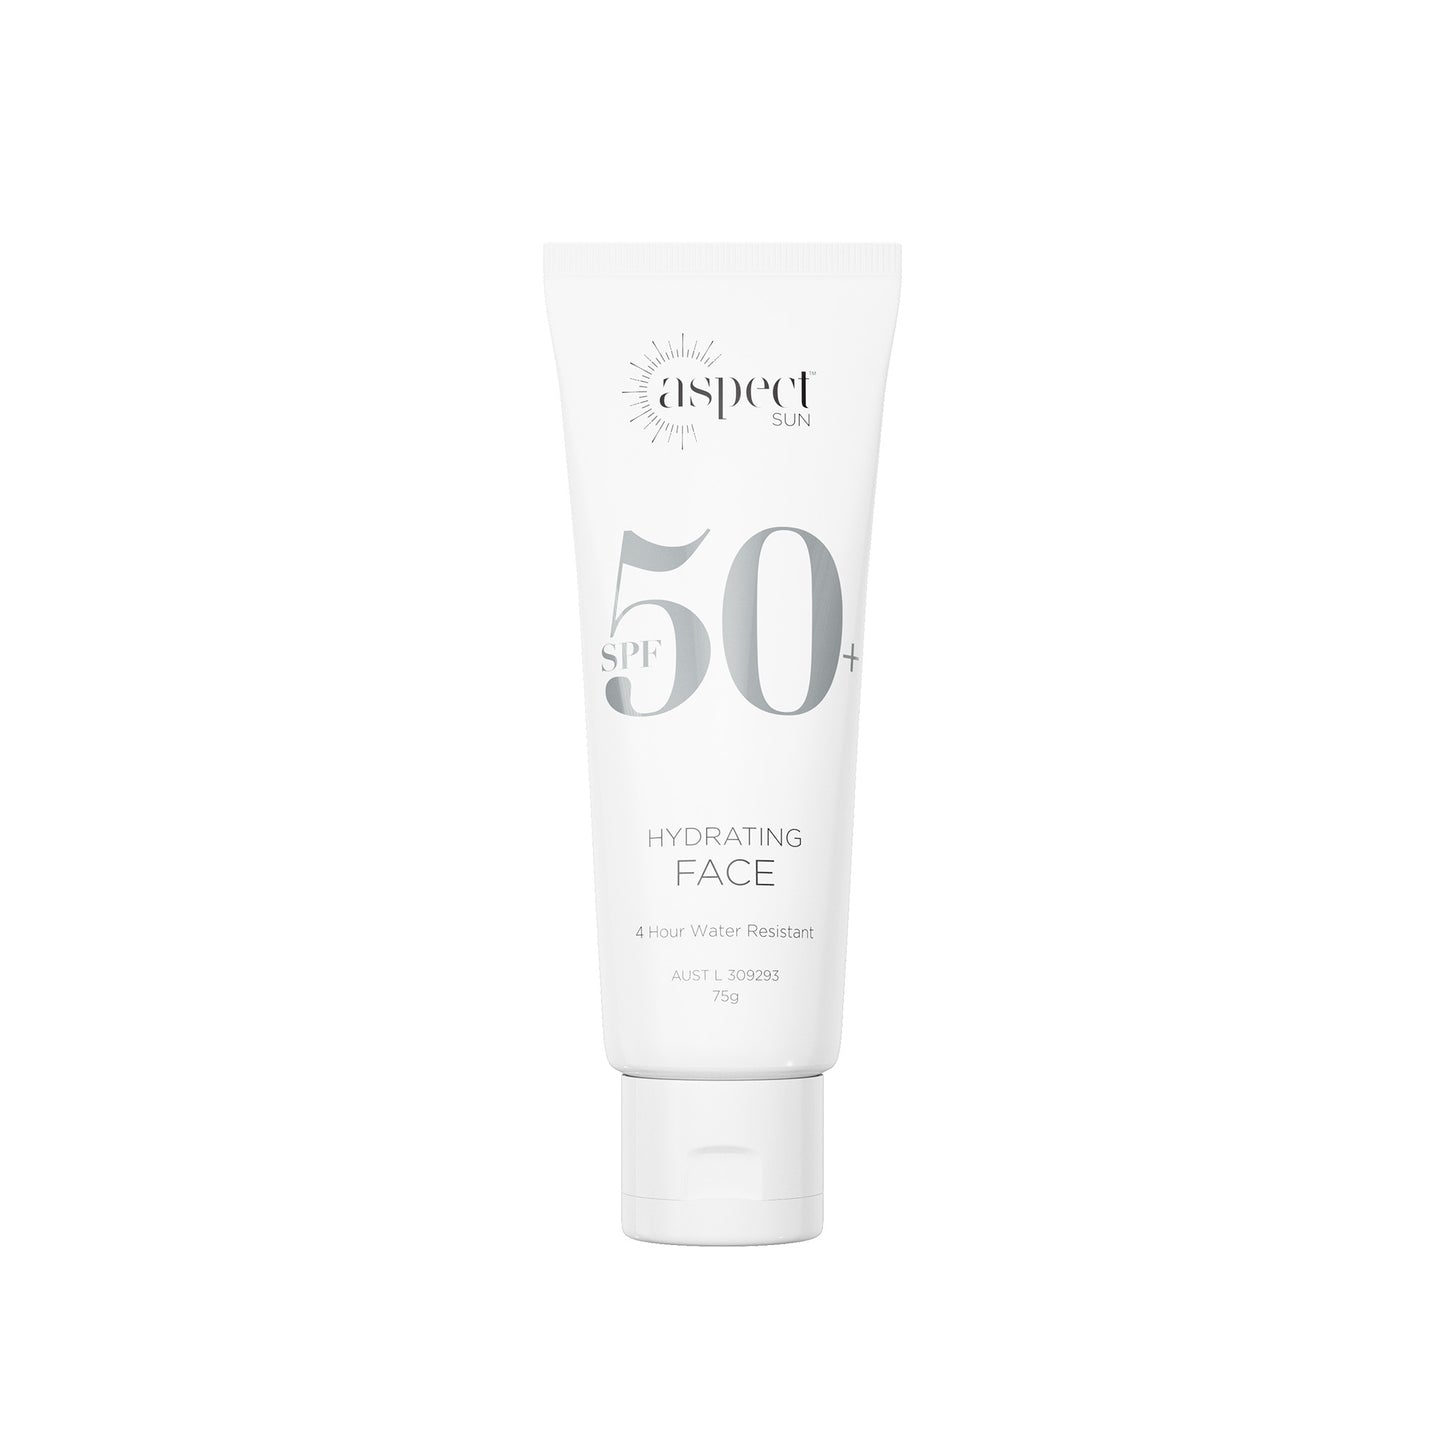 HYDRATING FACE SPF50+ 75G $59